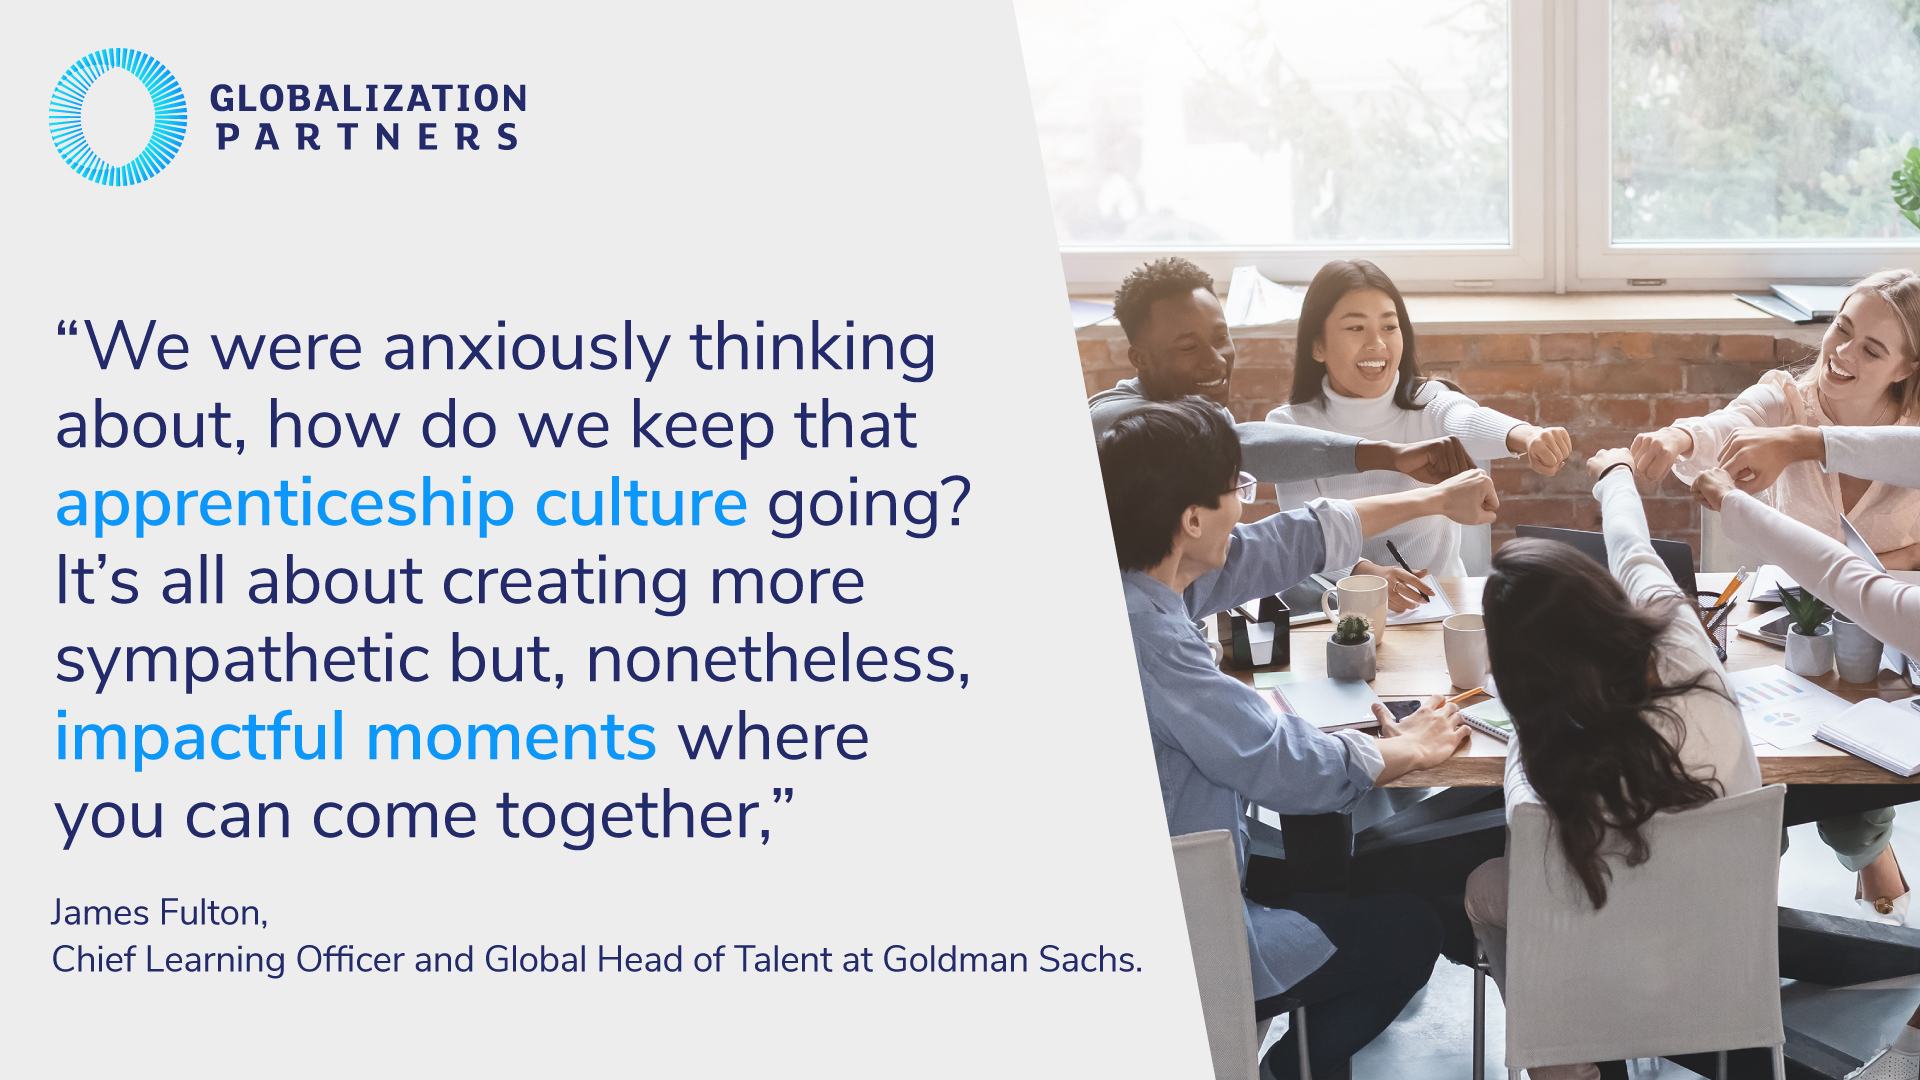 Quote from The Global Head of Talent of Goldman Sachs